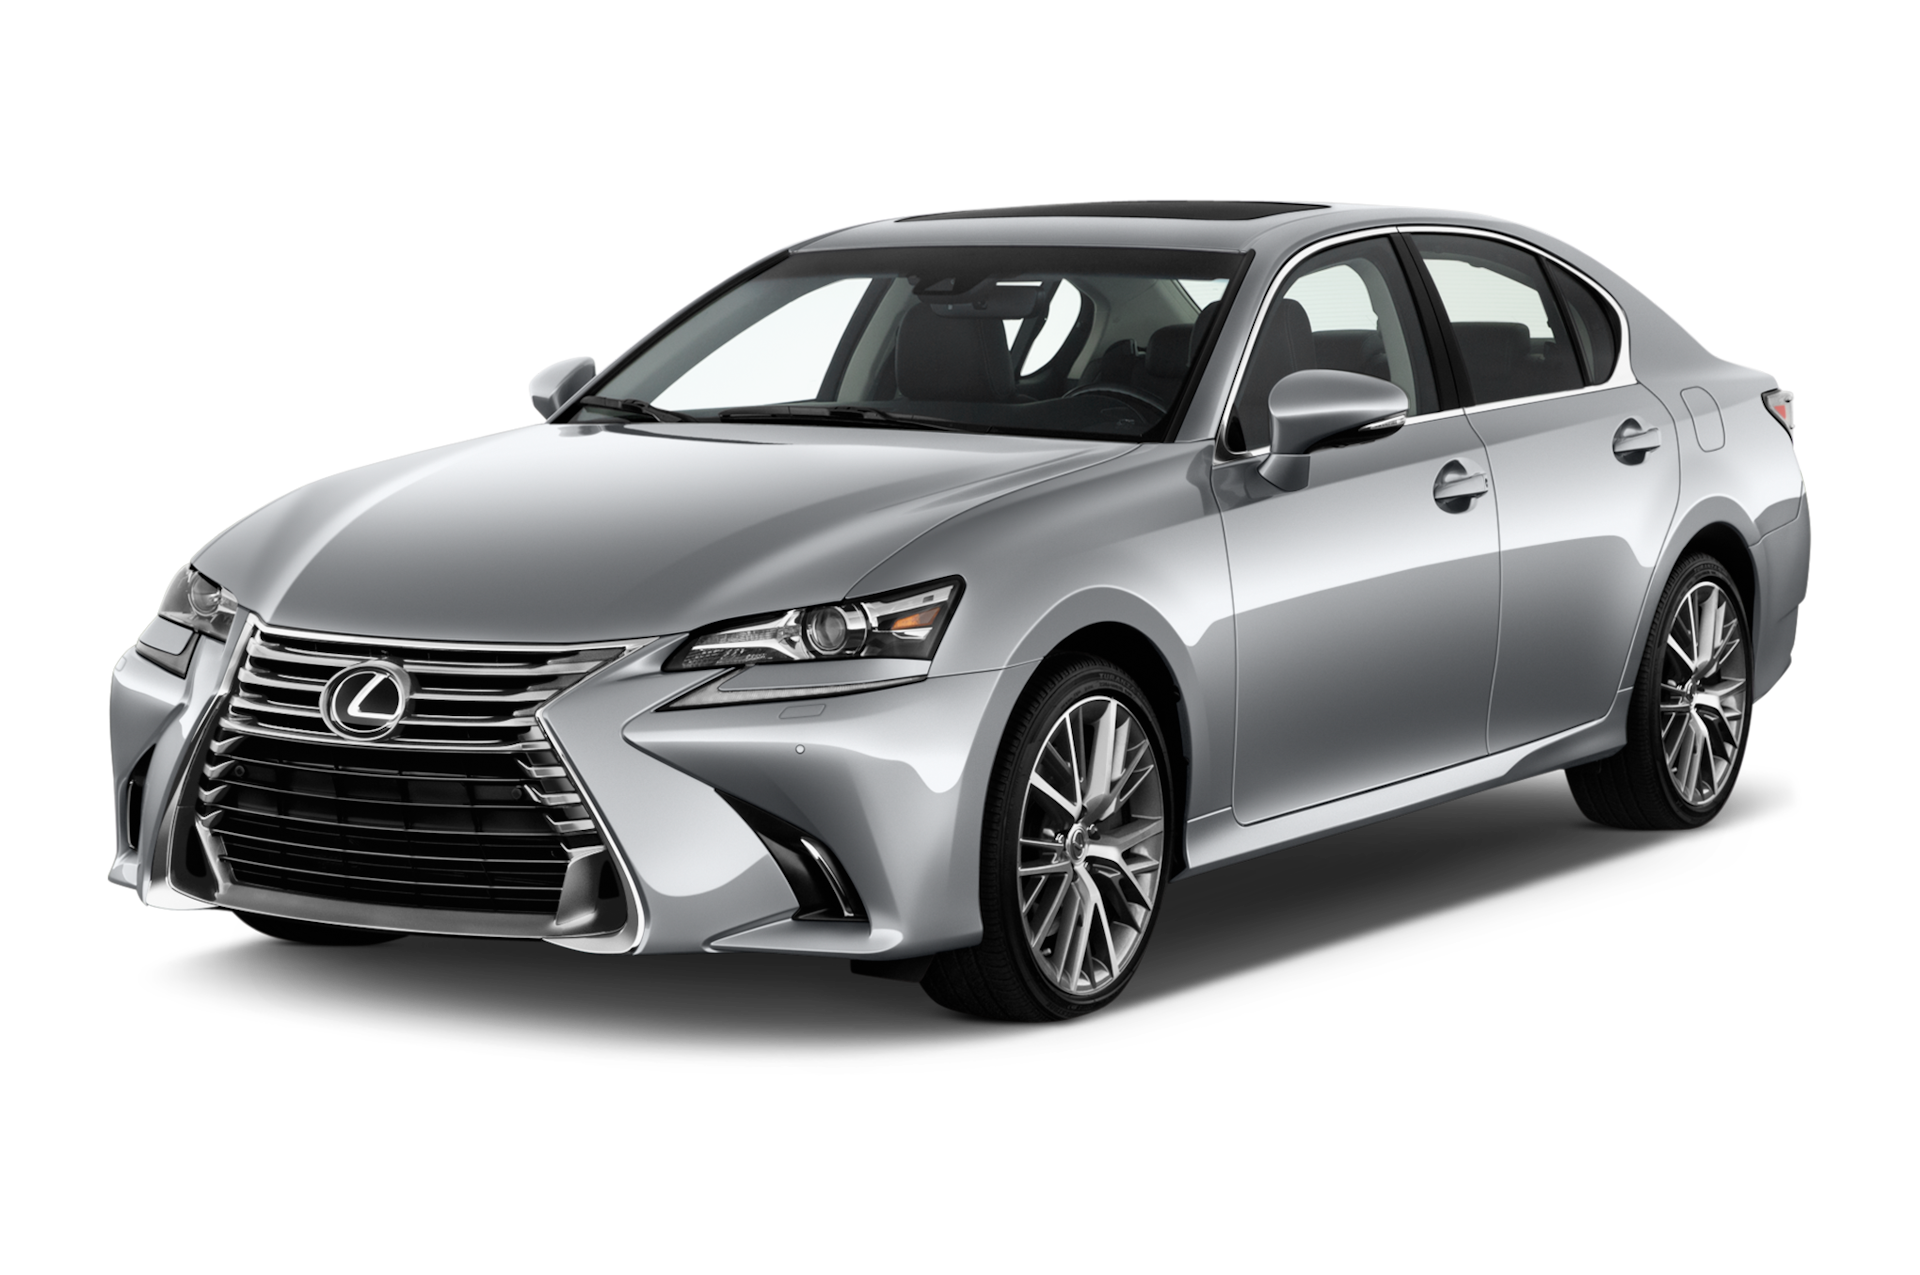 2020 Lexus GS Prices, Reviews, and Photos - MotorTrend